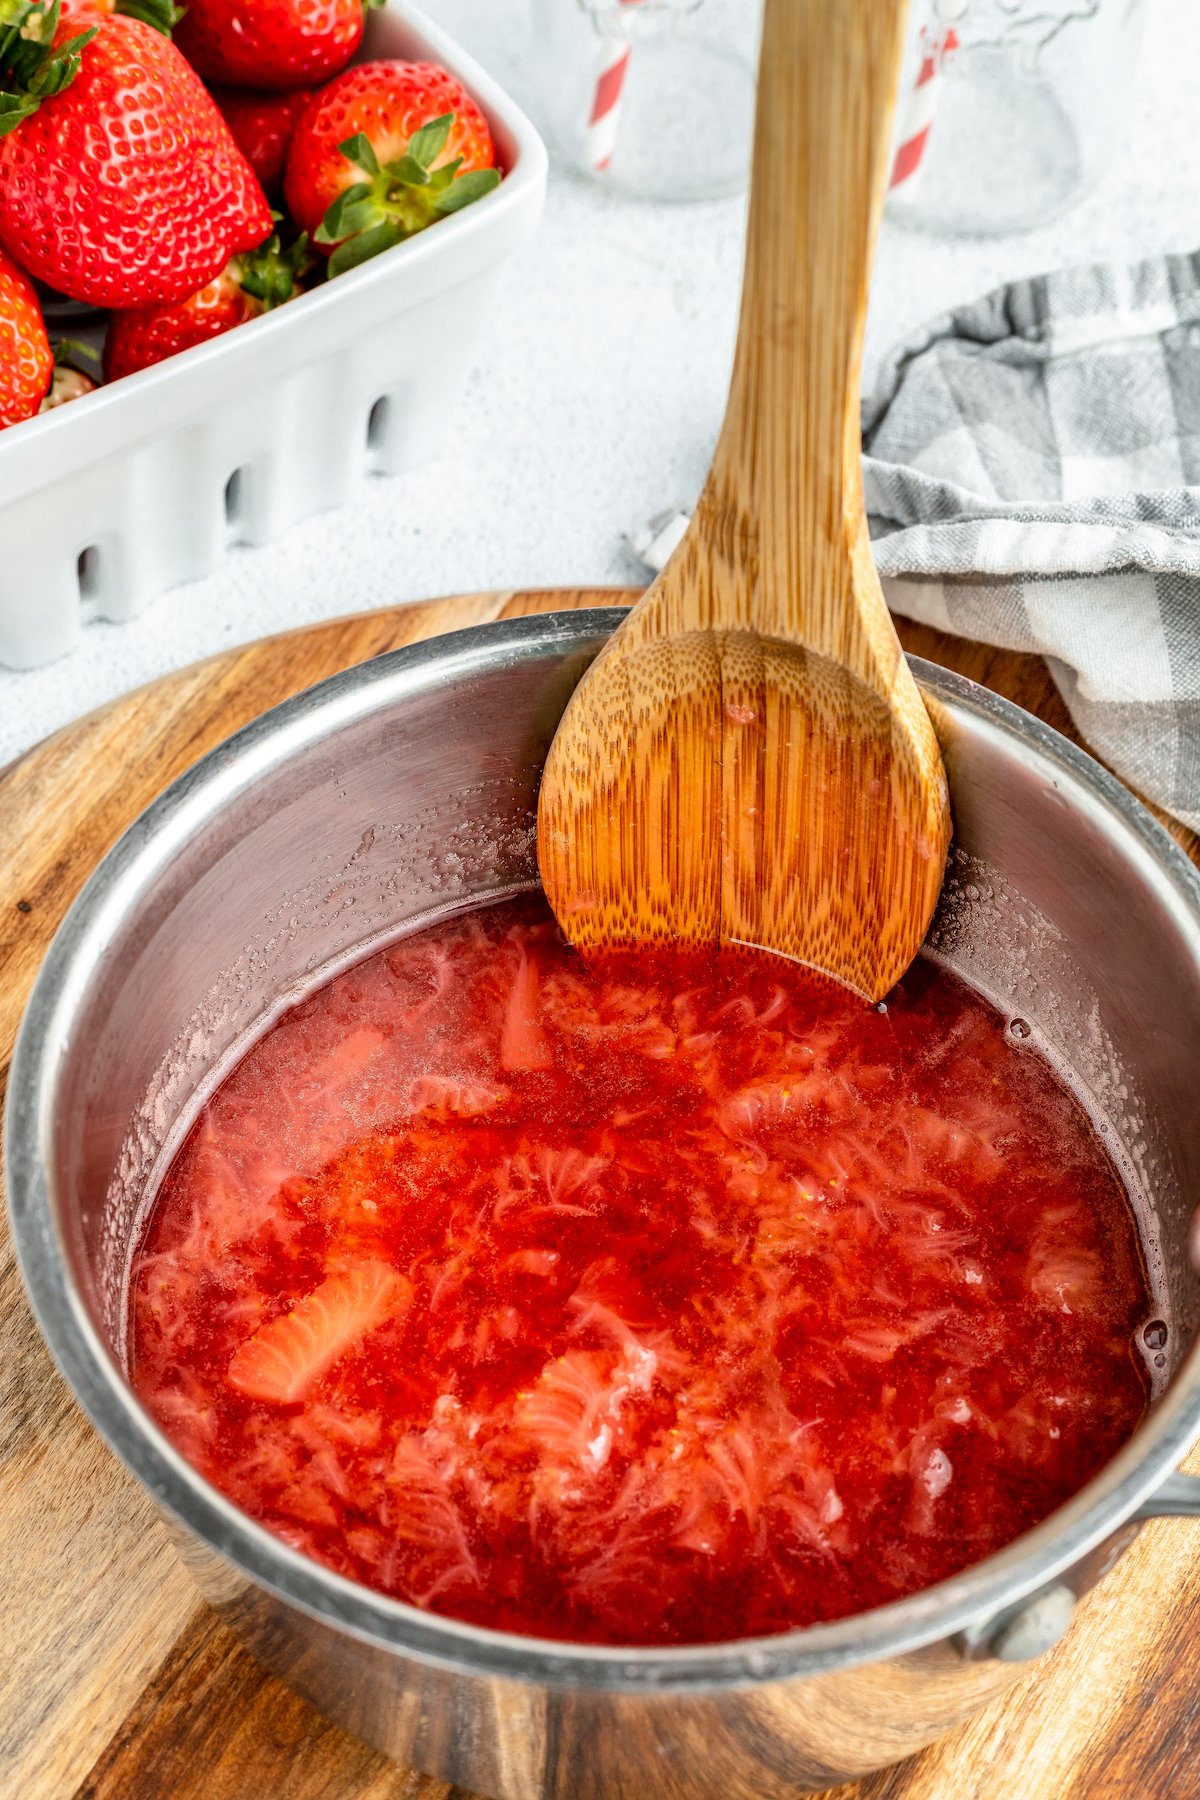 Simmering strawberries in a small saucepan. A wooden spoon is resting in the saucepan as well.